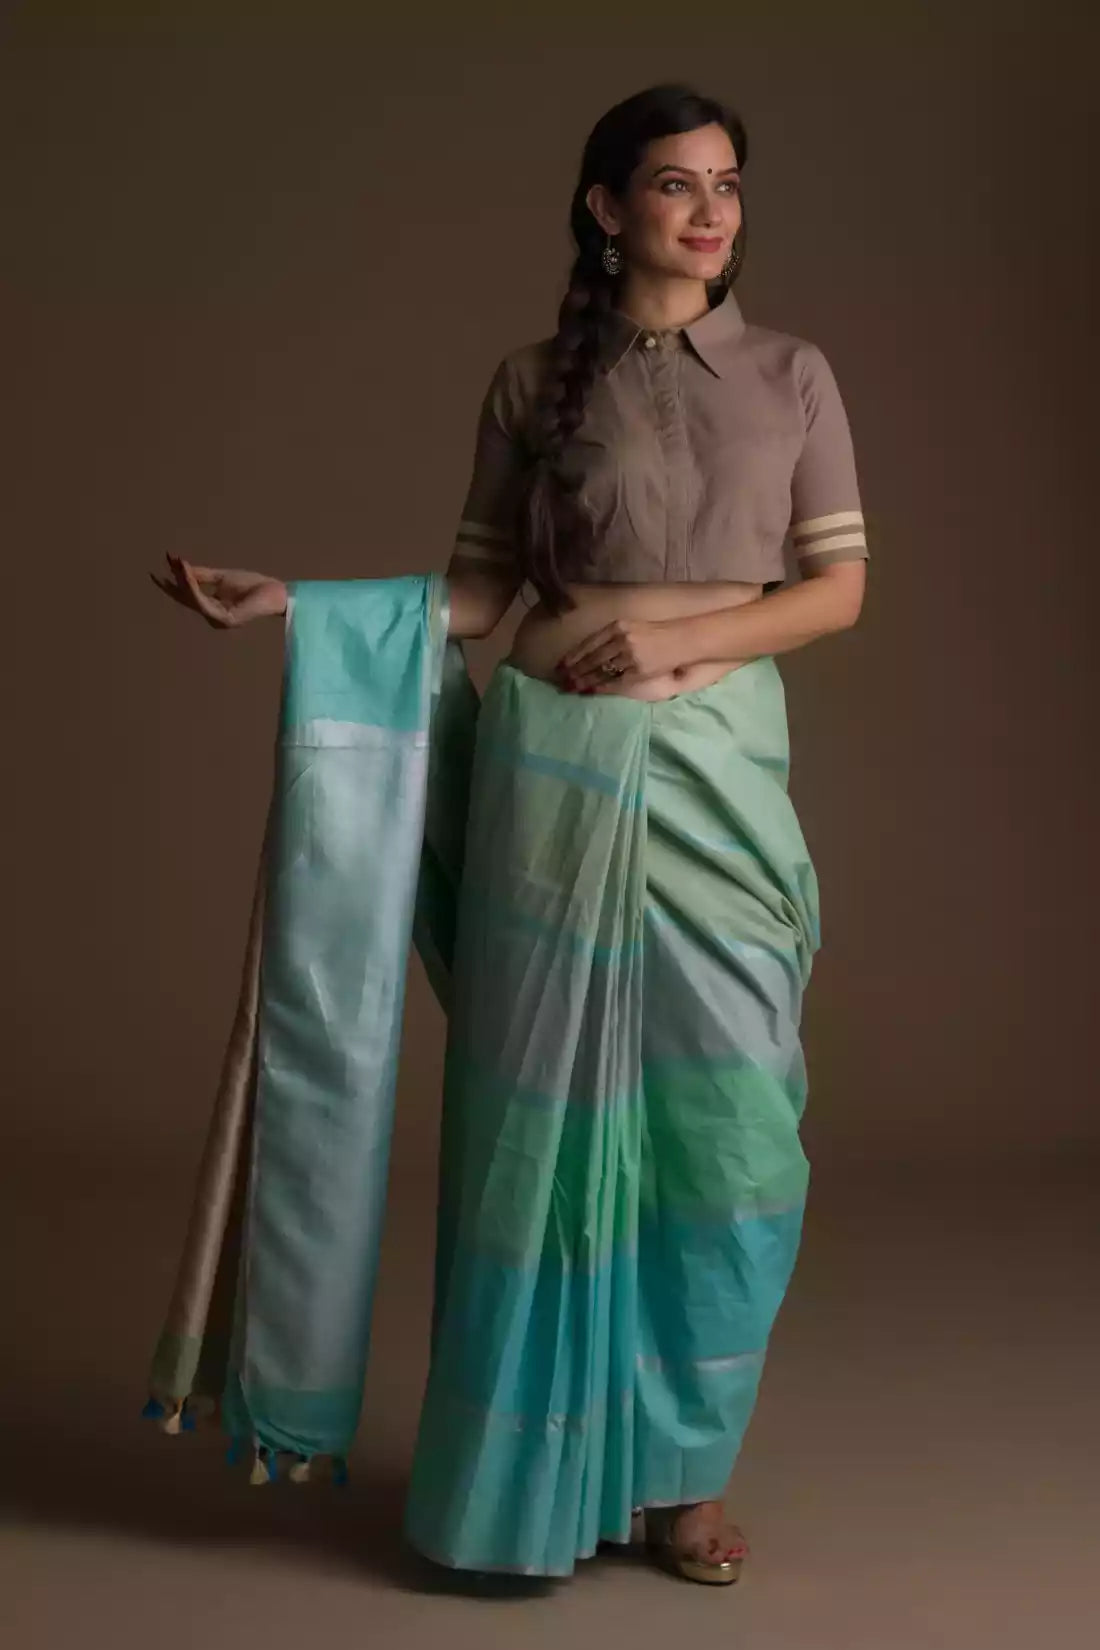 A pretty lady in Pure Cotton Horizontal stripes Casual Saree, a office wear for women